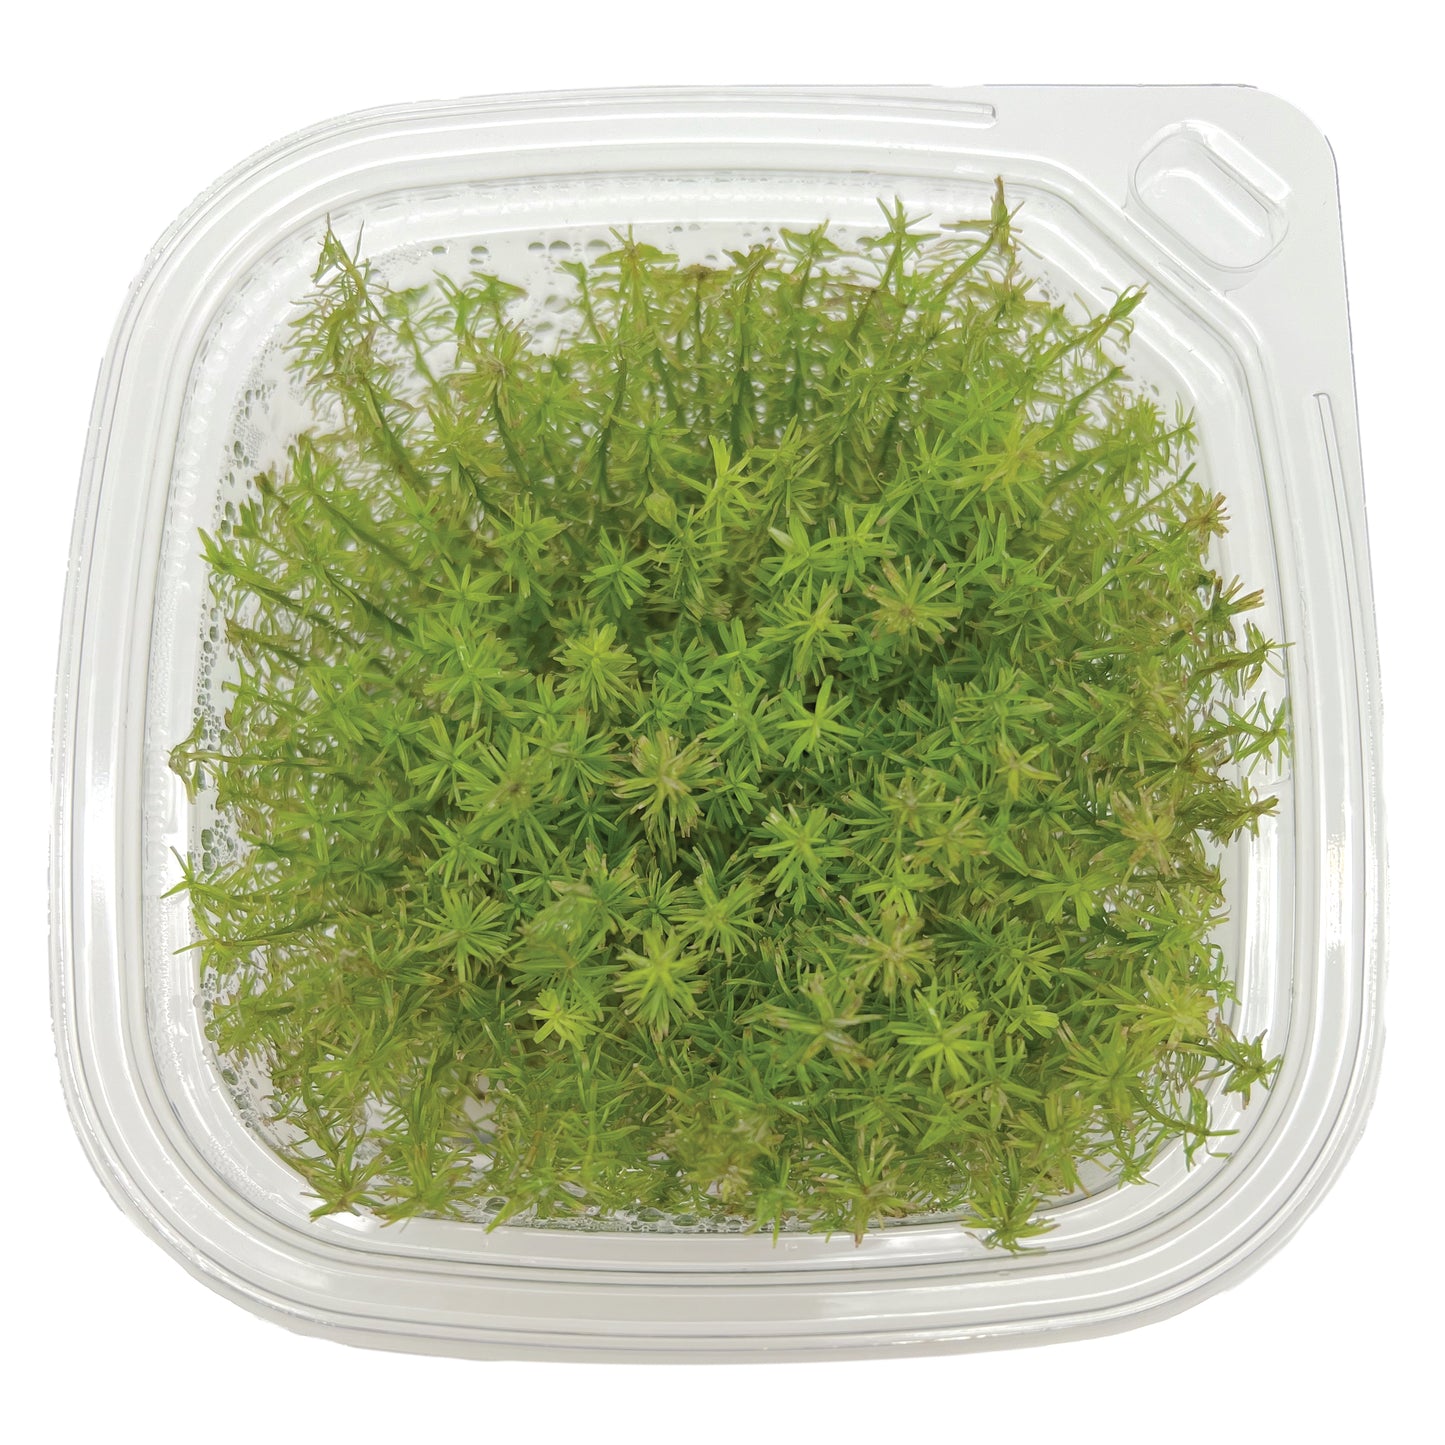 Rotala sp. ‘Vietnam’, Large 4x4" cup